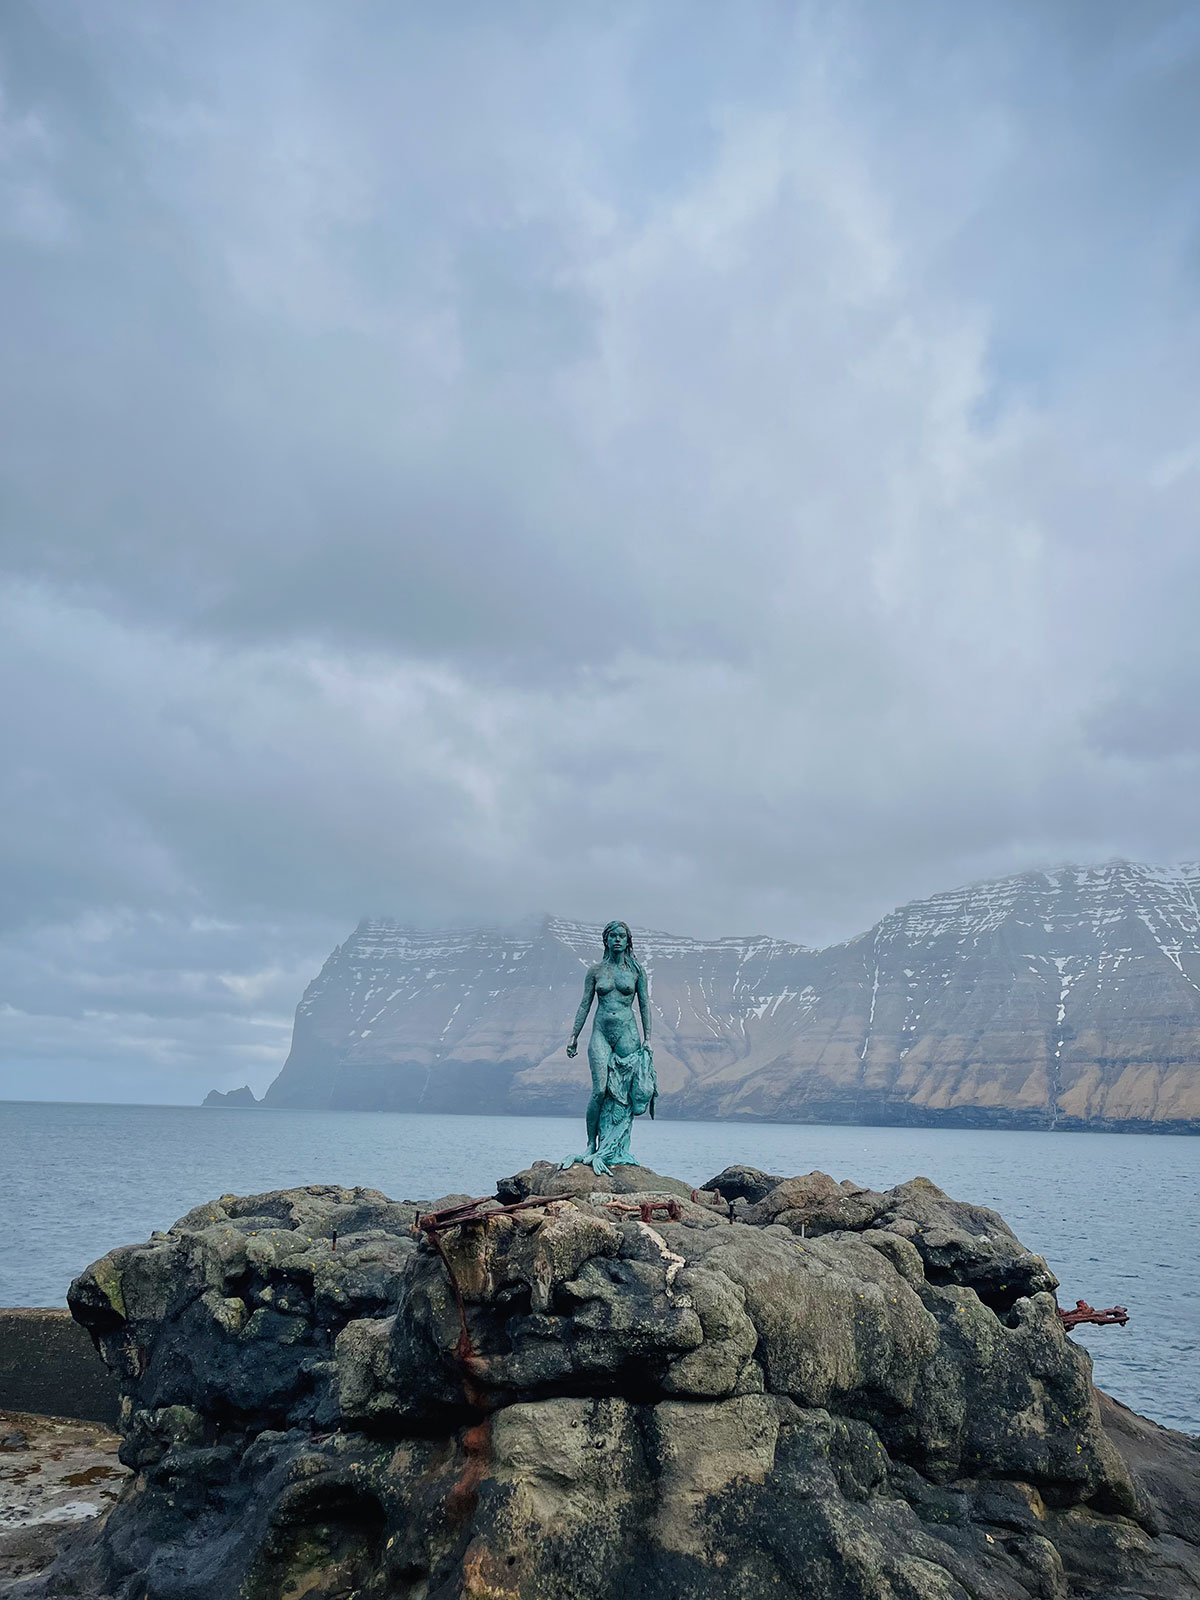 This image features the captivating Seal Lady sculpture on Kalsoy Island. Carved with meticulous detail, the Seal Lady gracefully emerges from the rugged landscape, paying homage to the rich maritime heritage of the Faroe Islands.